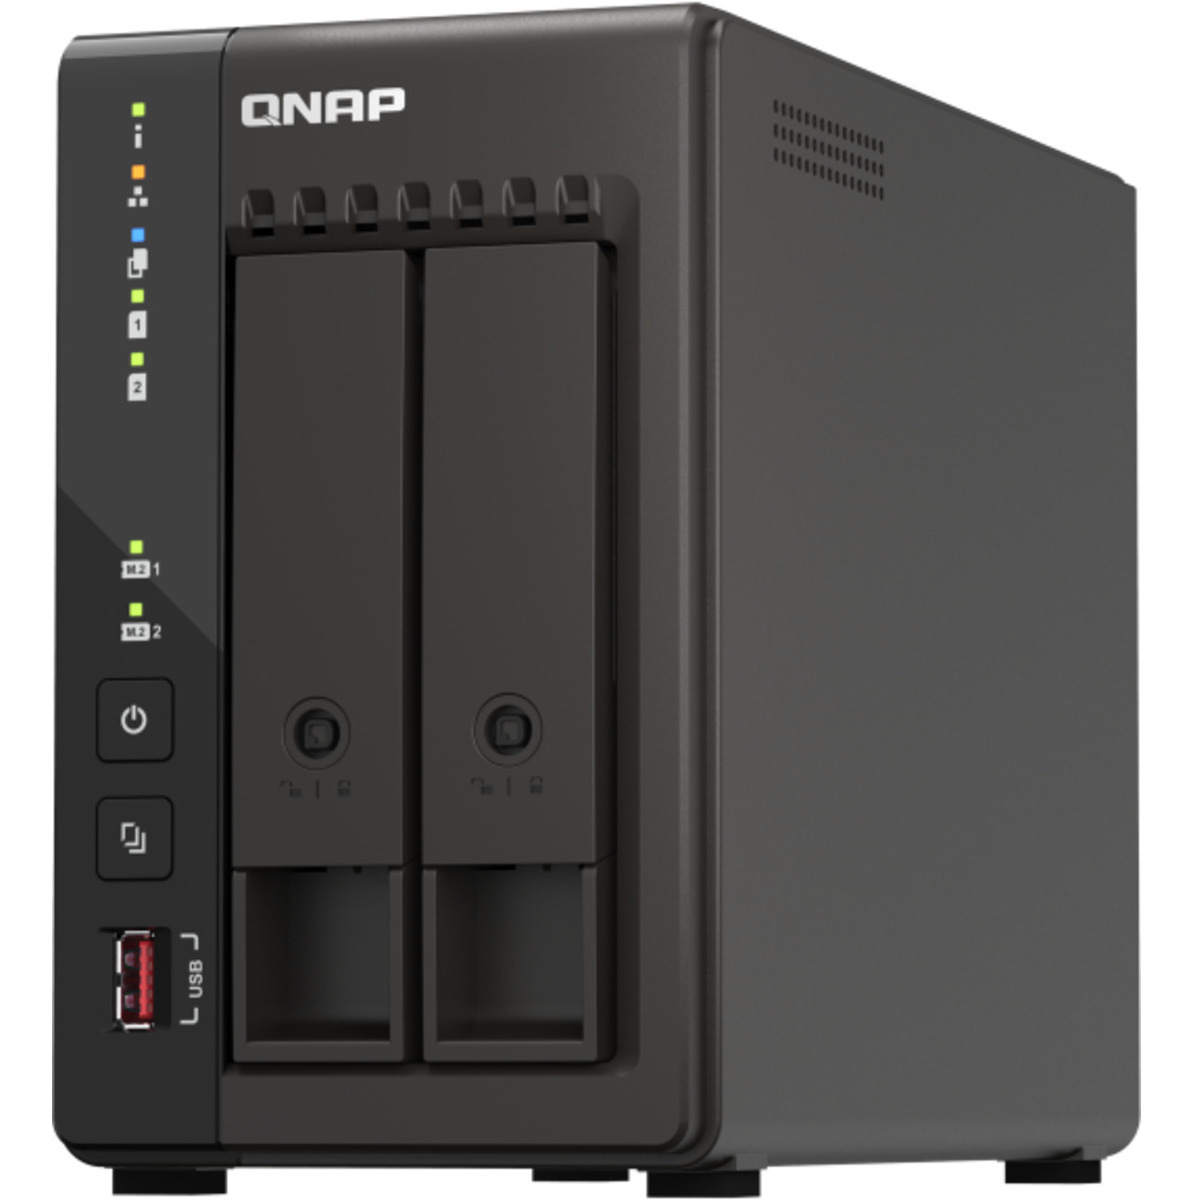 buy $1384 QNAP TS-253E 40tb Desktop NAS - Network Attached Storage Device 2x20000gb Seagate EXOS X20 ST20000NM007D 3.5 7200rpm SATA 6Gb/s HDD ENTERPRISE Class Drives Installed - Burn-In Tested - nas headquarters buy network attached storage server device das new raid-5 free shipping simply usa TS-253E